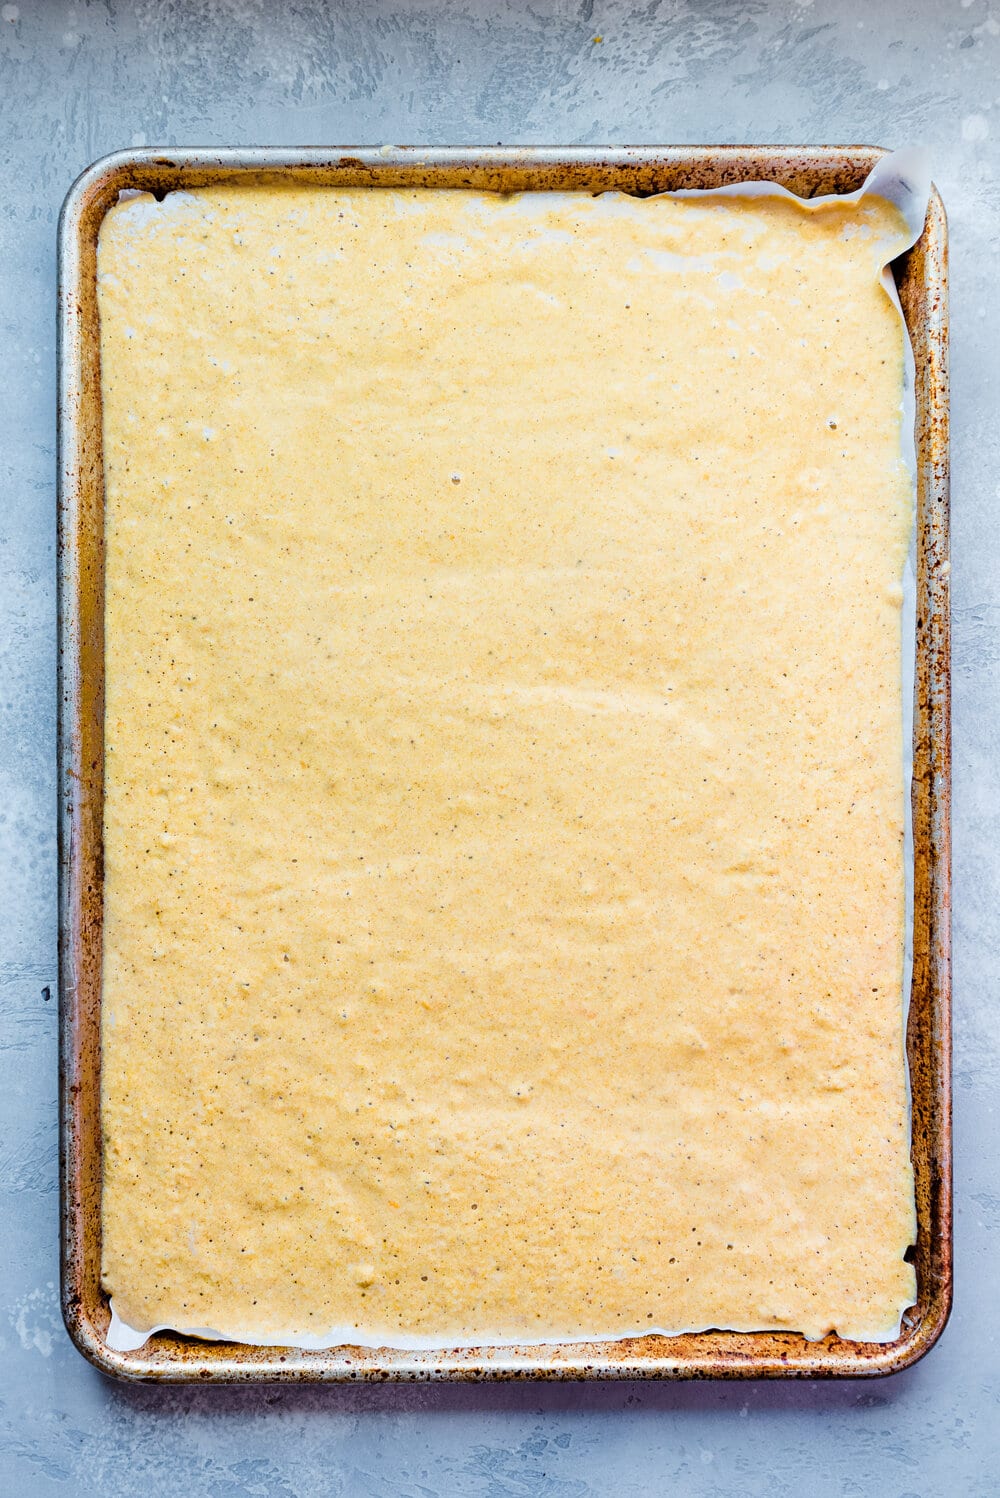 Pancake batter in a sheet pan lined with parchment paper.